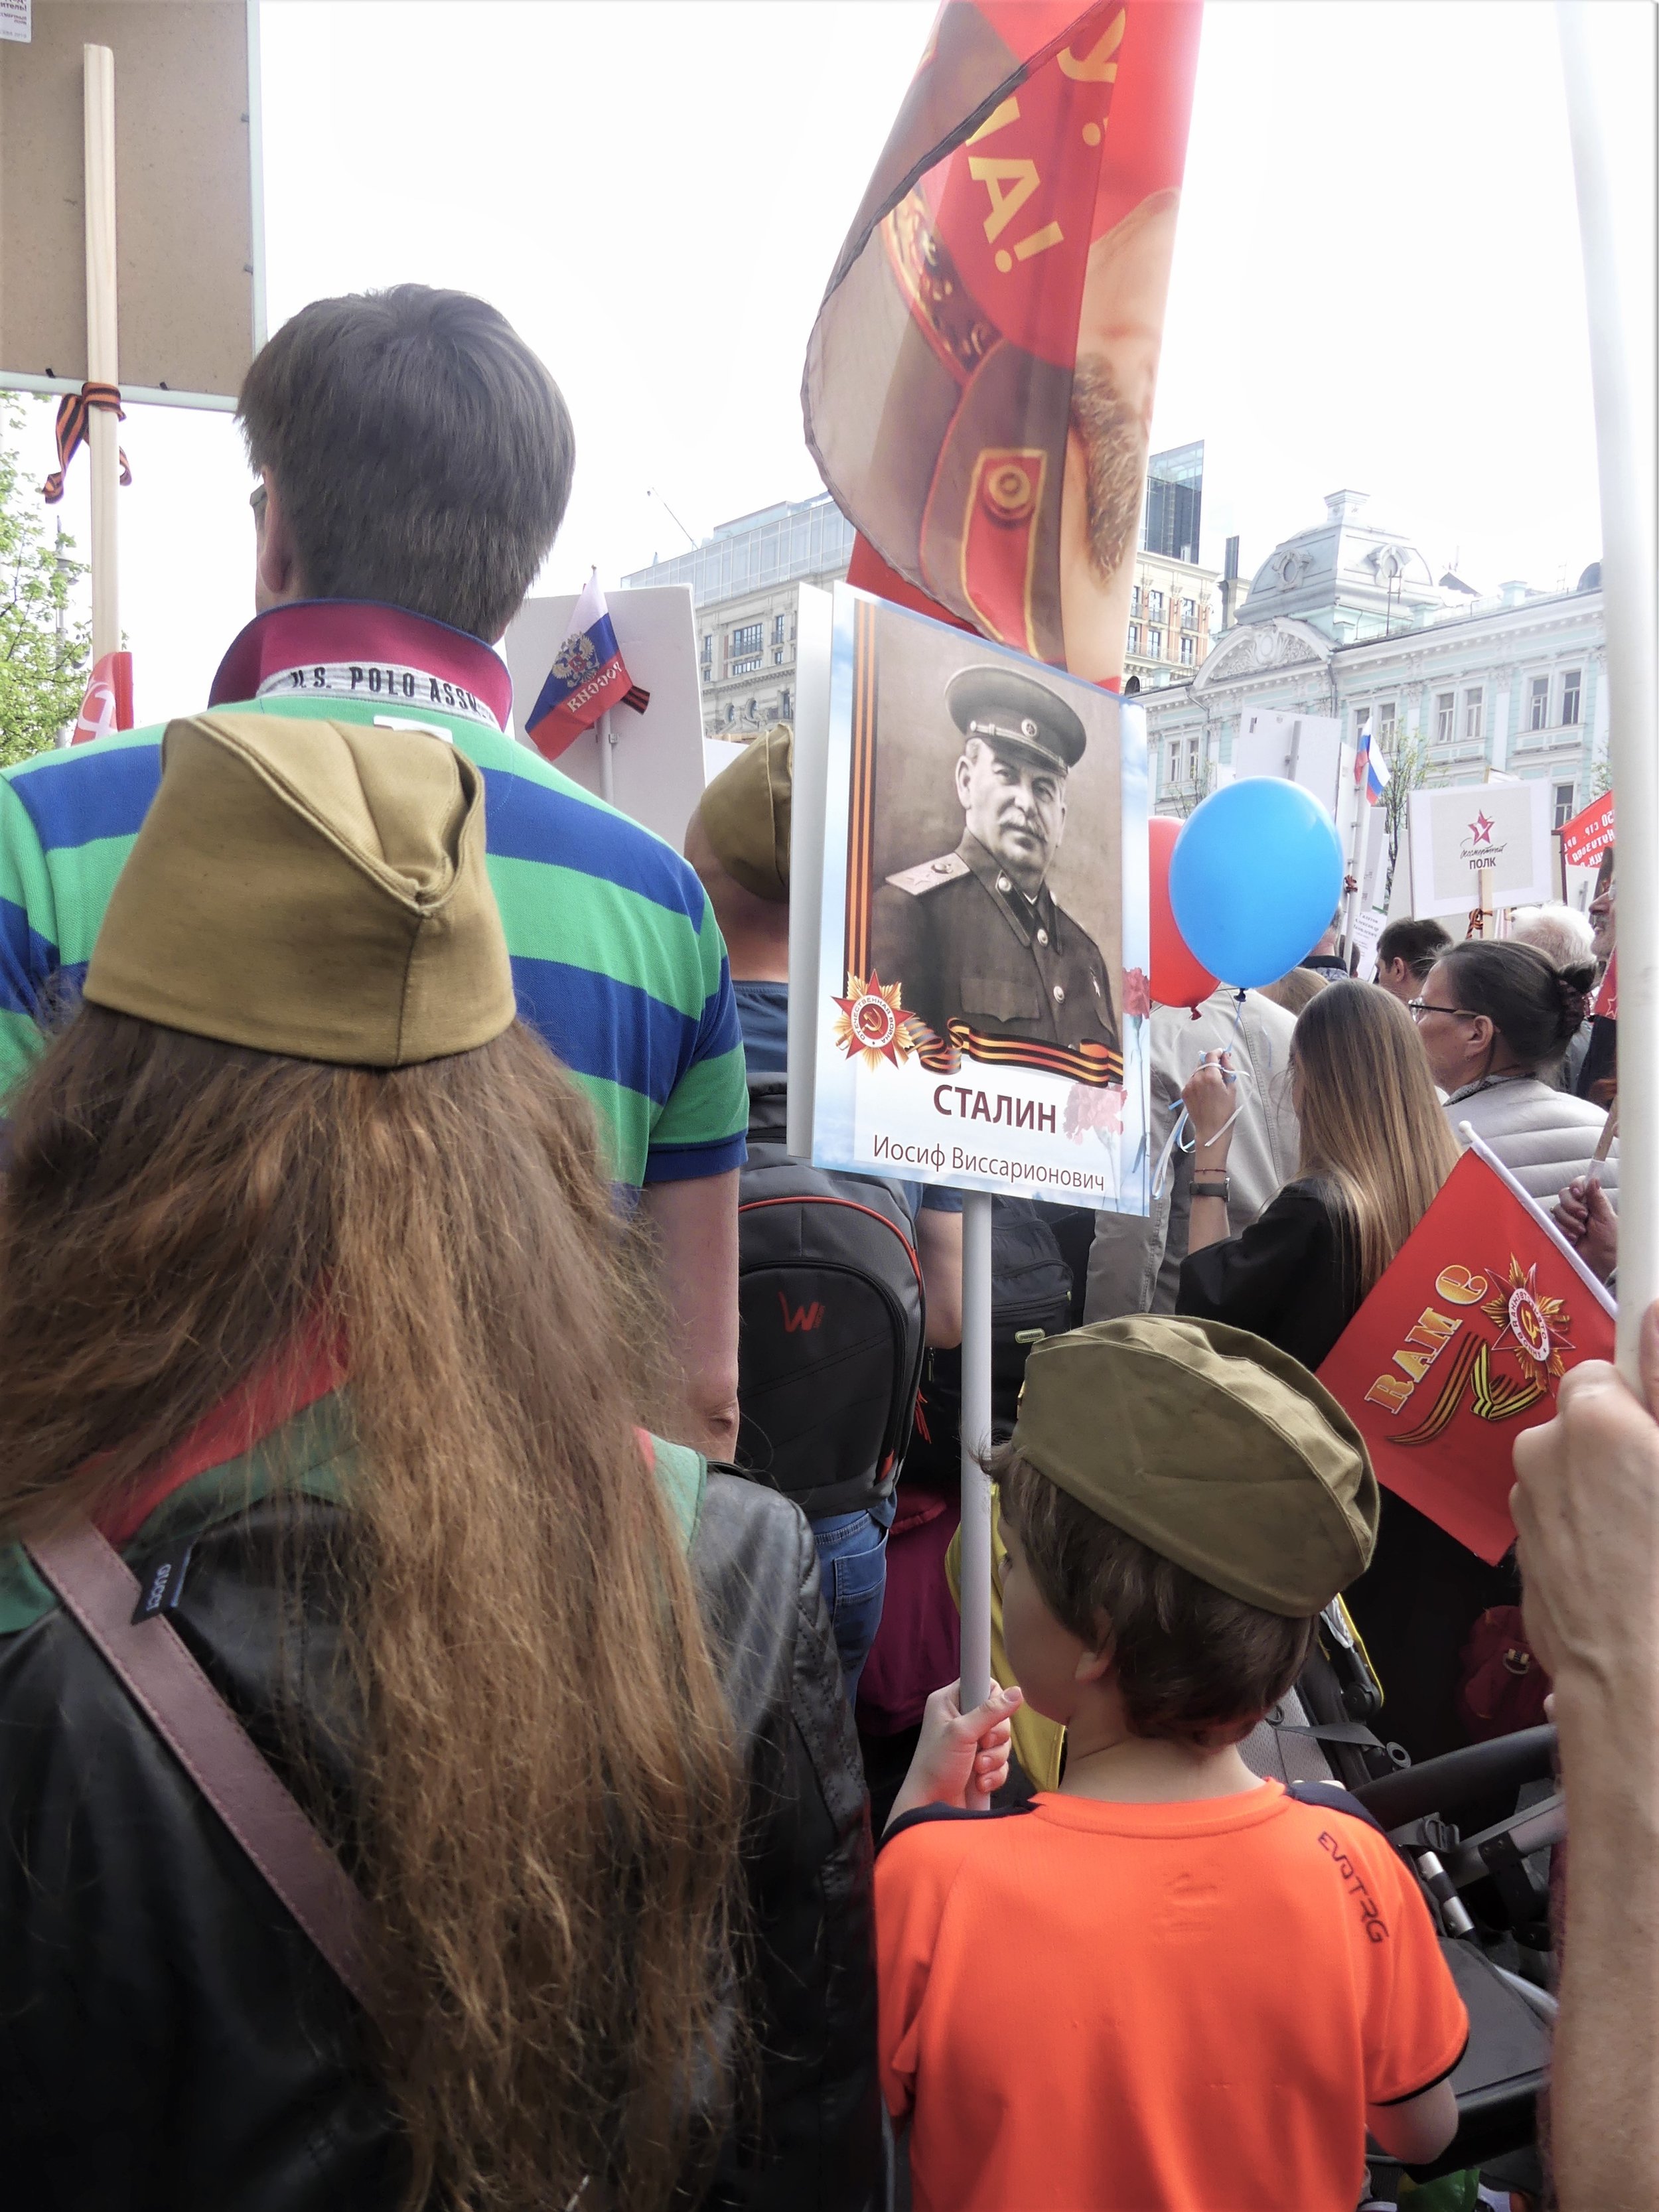  A child holds a placard with a picture of Joseph Stalin — similar to the one which triggered the verbal altercation I witnessed later that day. 